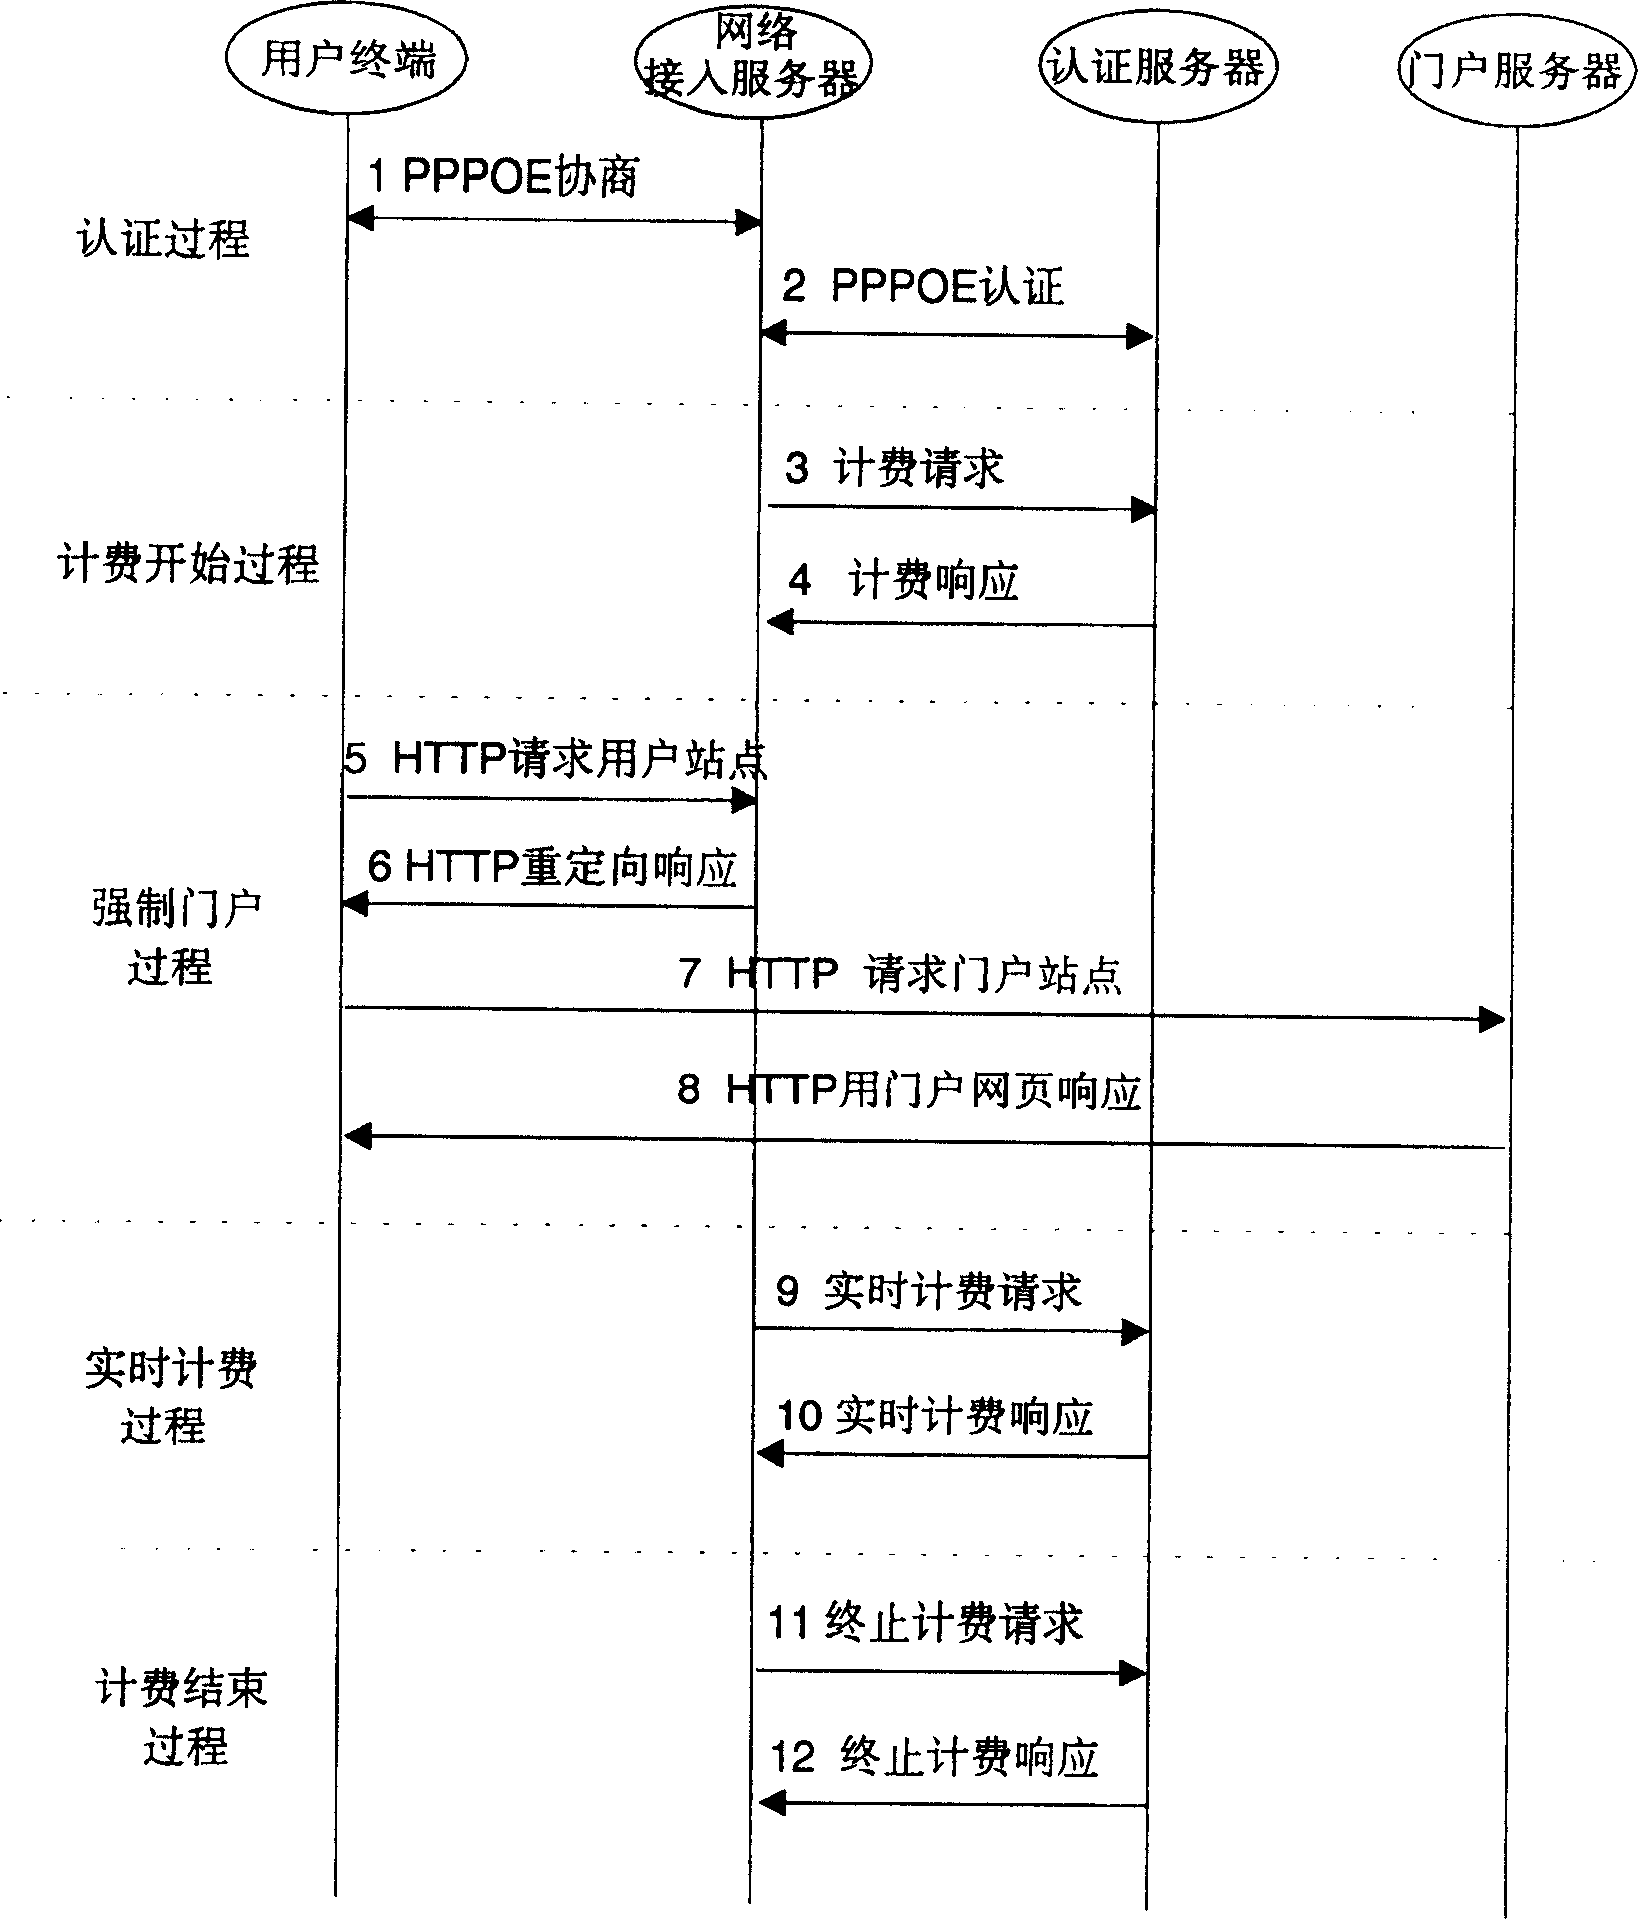 Method for displaying door web page based on Ethernet protocol when the user is logged